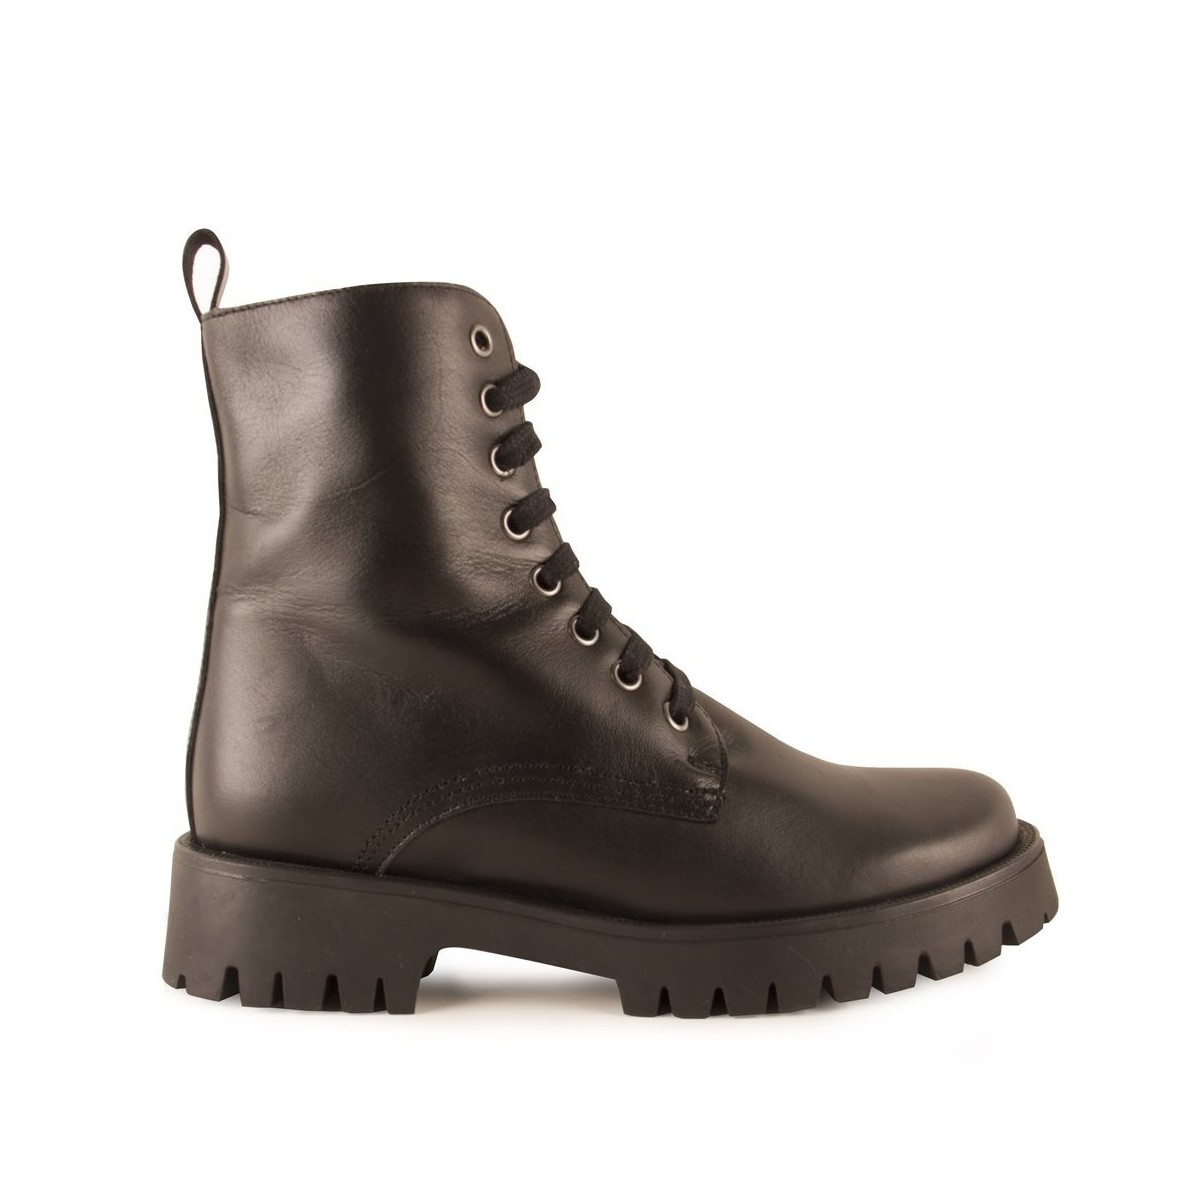 Black leather military ankle boots by Tekila